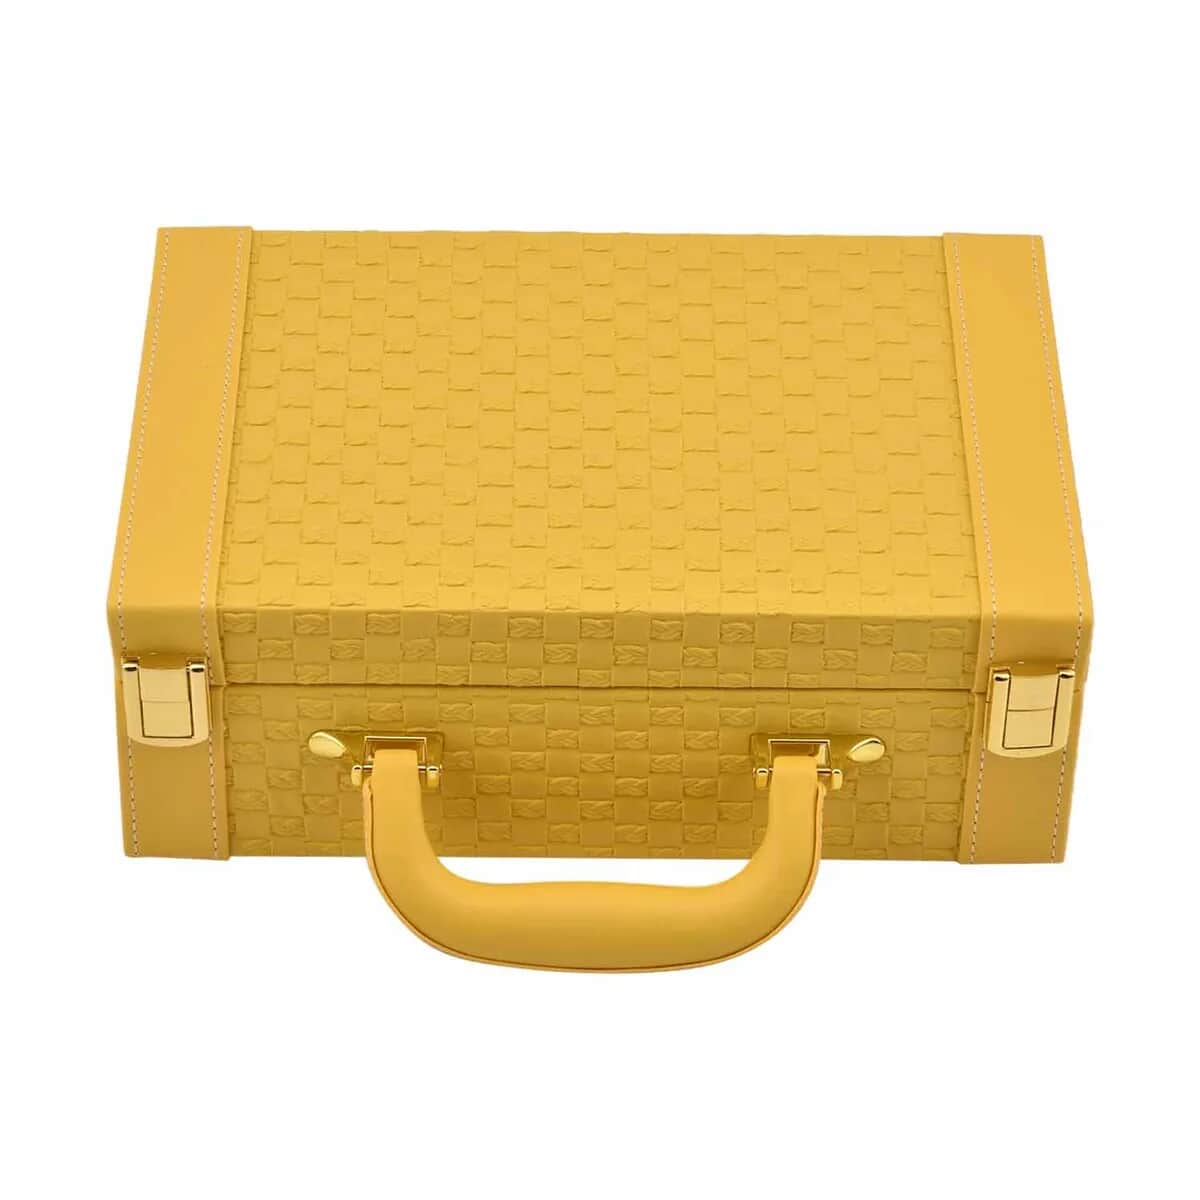 Yellow Jewelry Organizer Woven Texture Briefcase Faux Leather Box Case with  Handle Lock